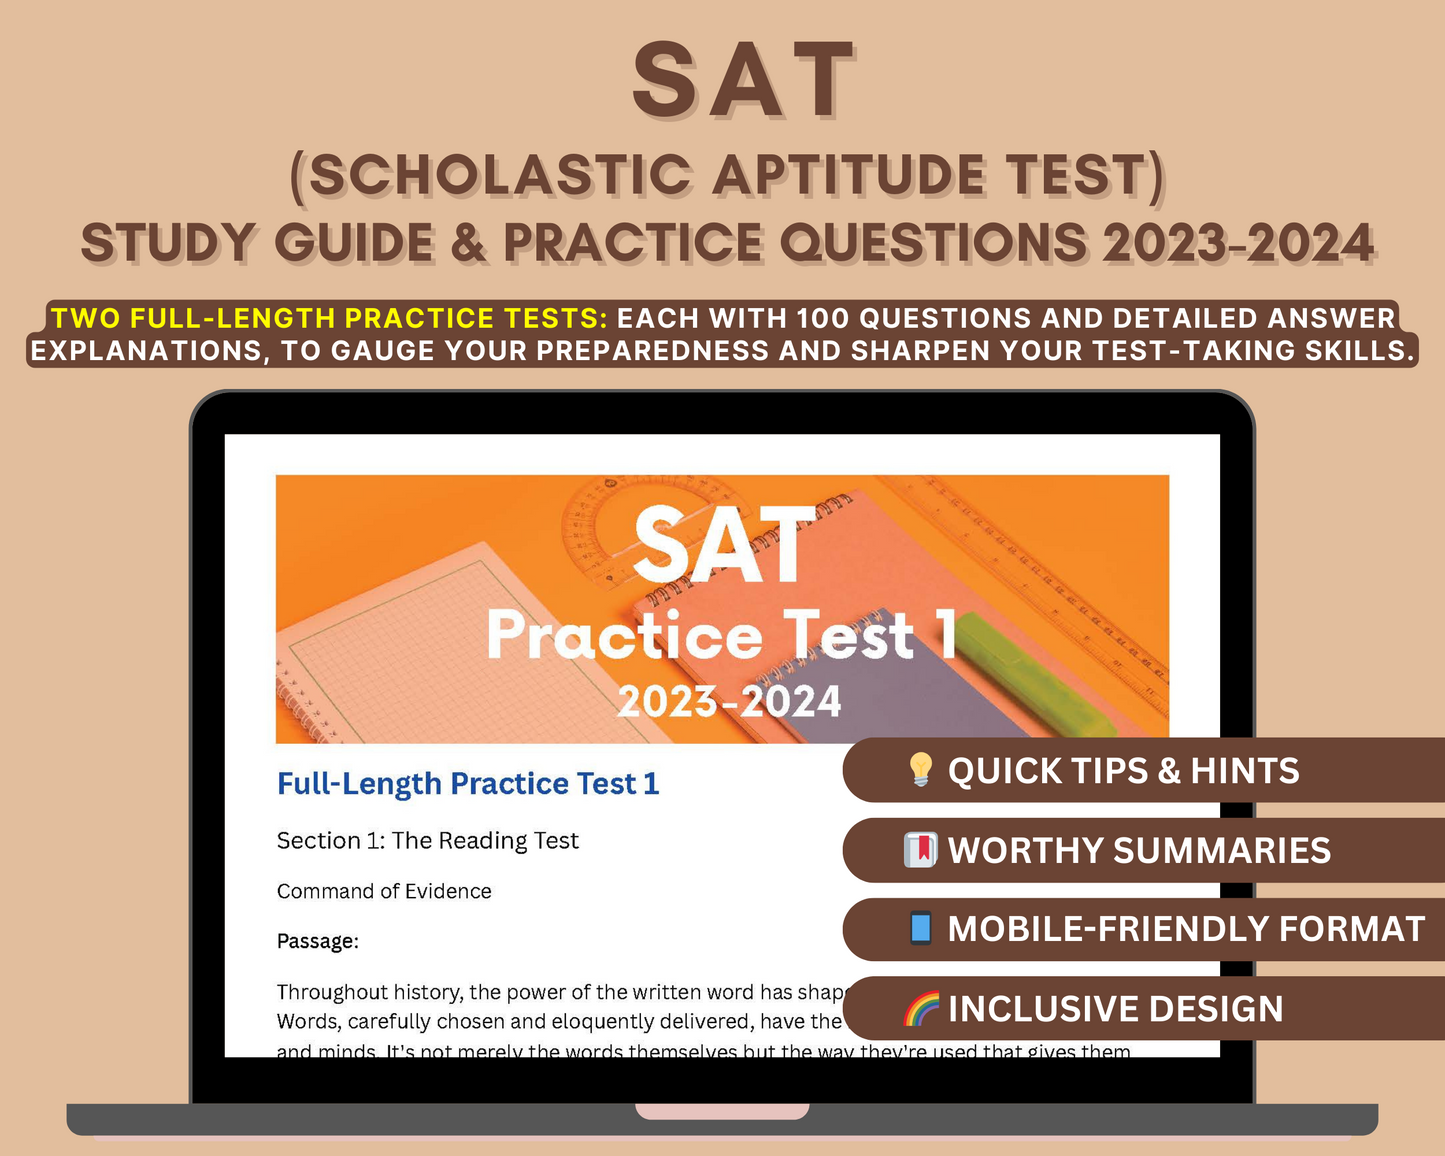 SAT Exam Prep 2023-2024: Comprehensive Study Guide with In-Depth Content Review, Practice Tests & Exam Strategies